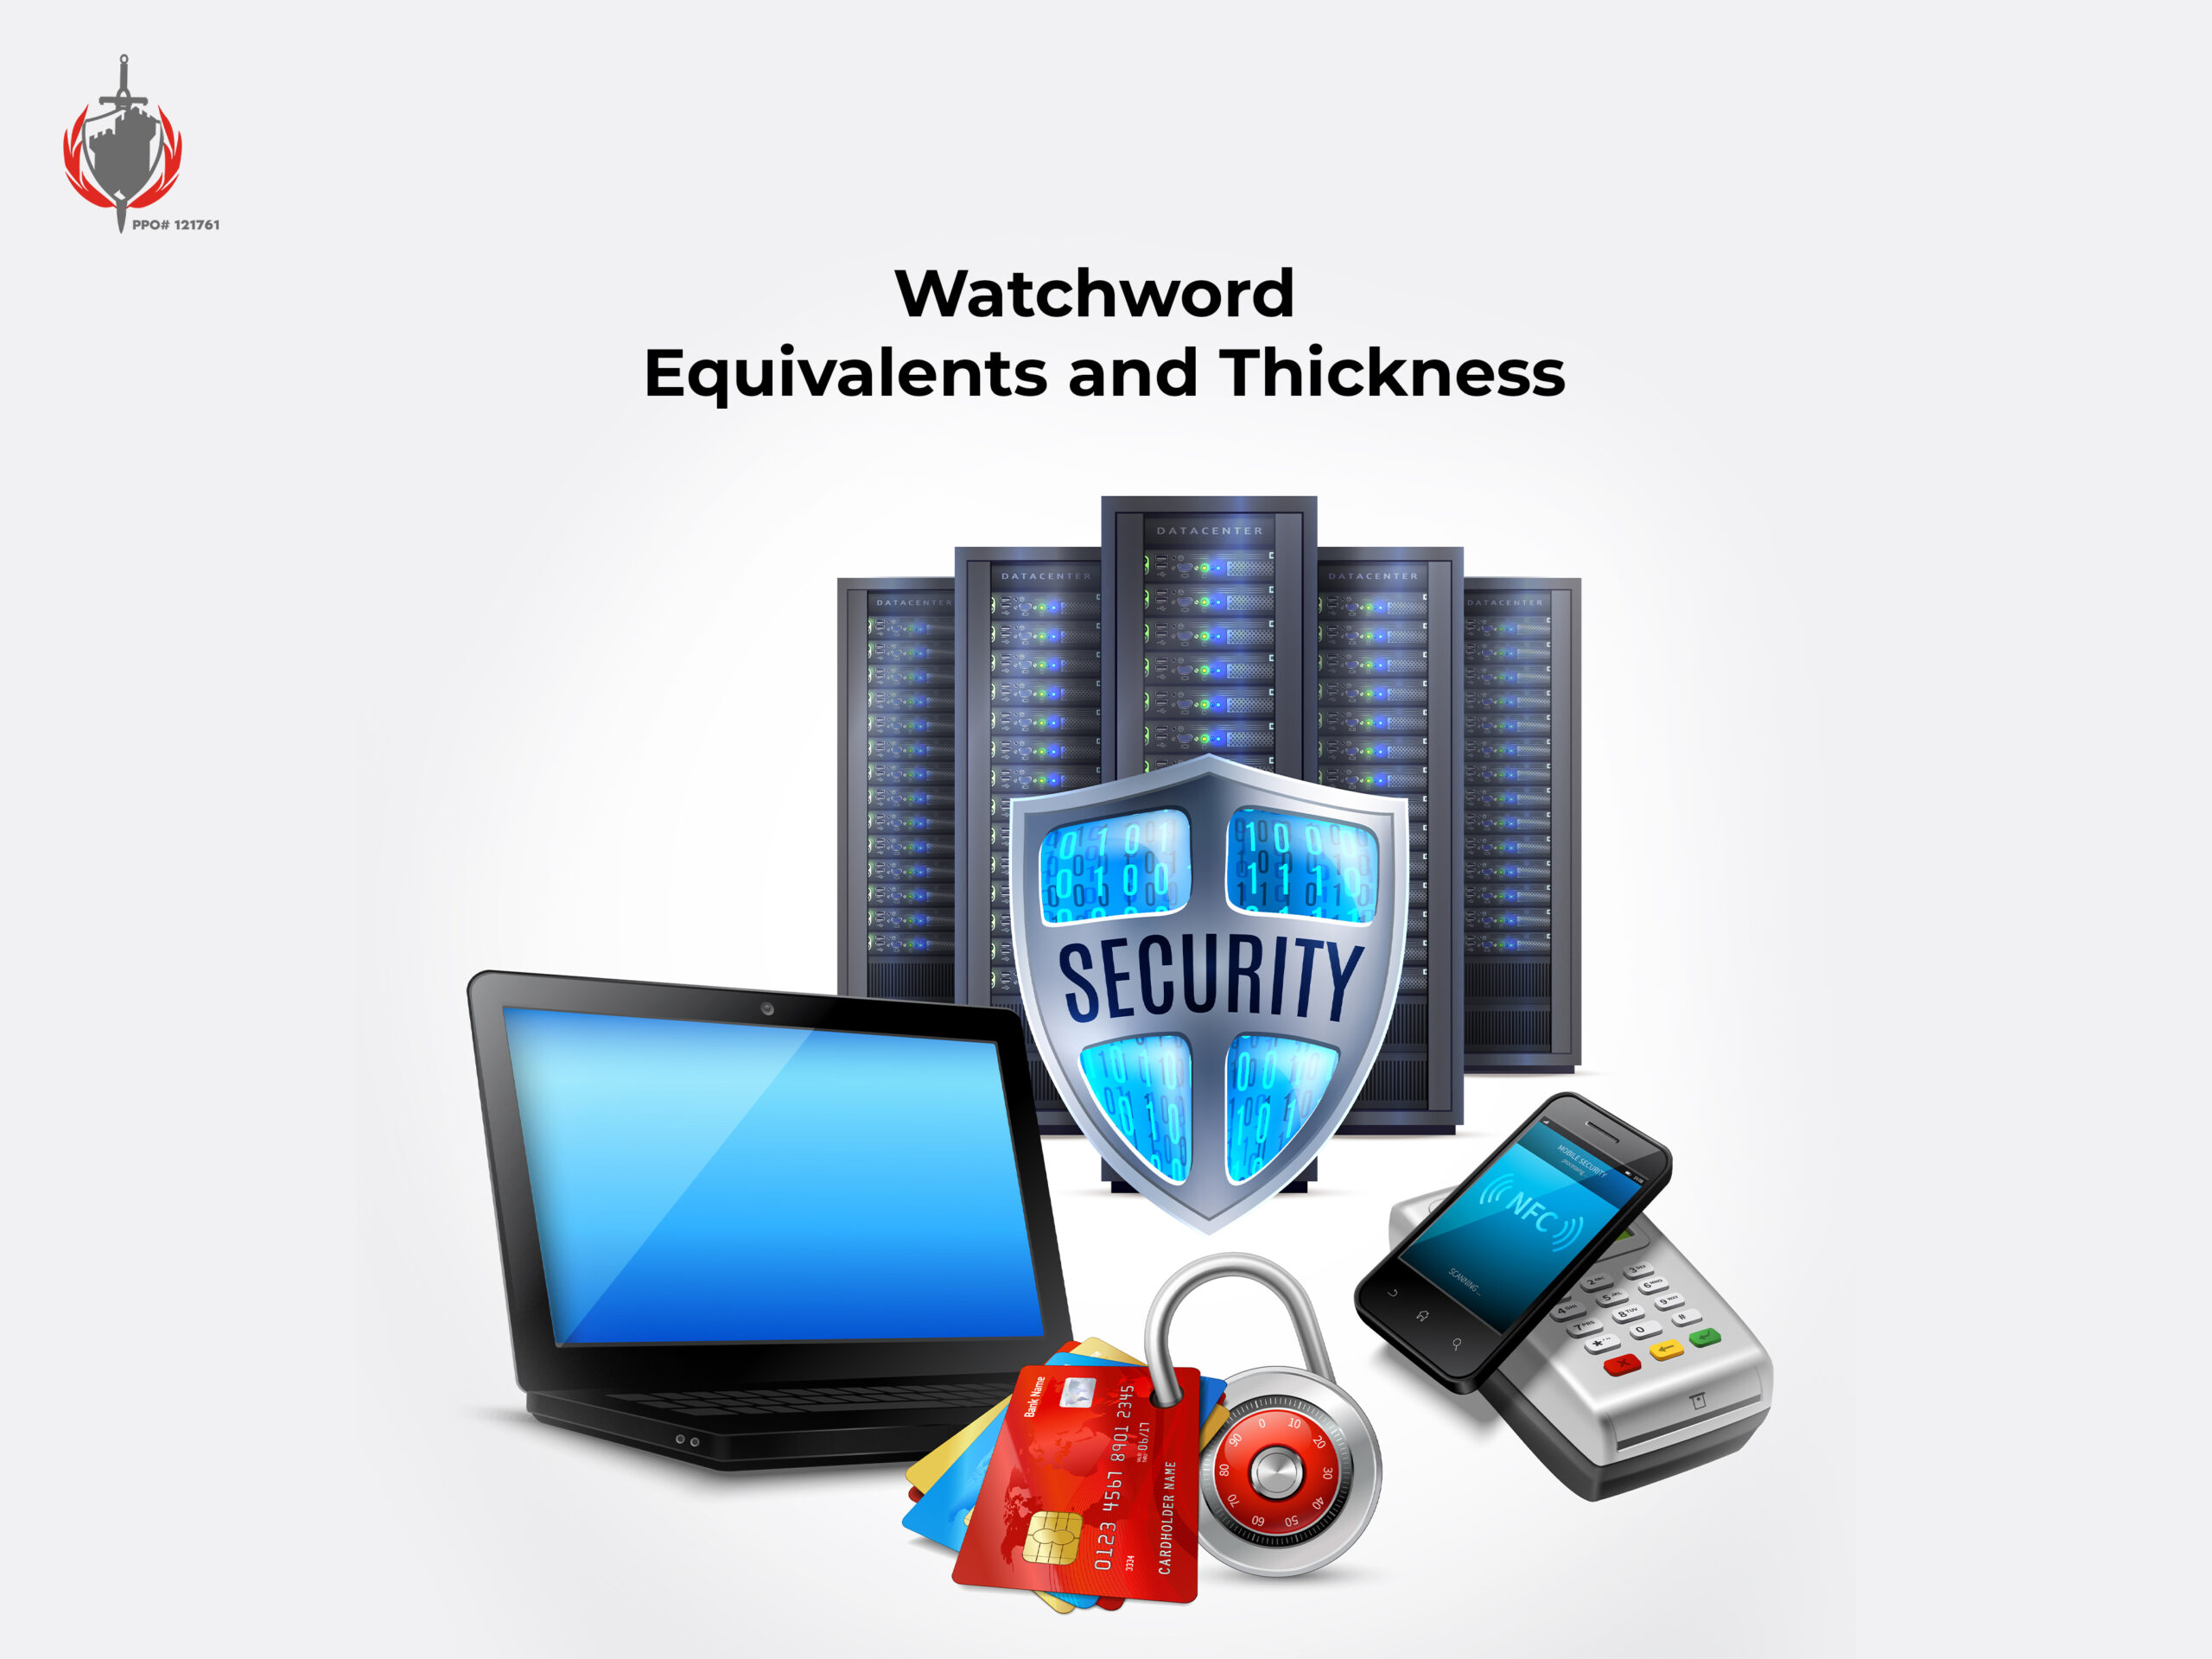 Watchword Equivalents and Thickness